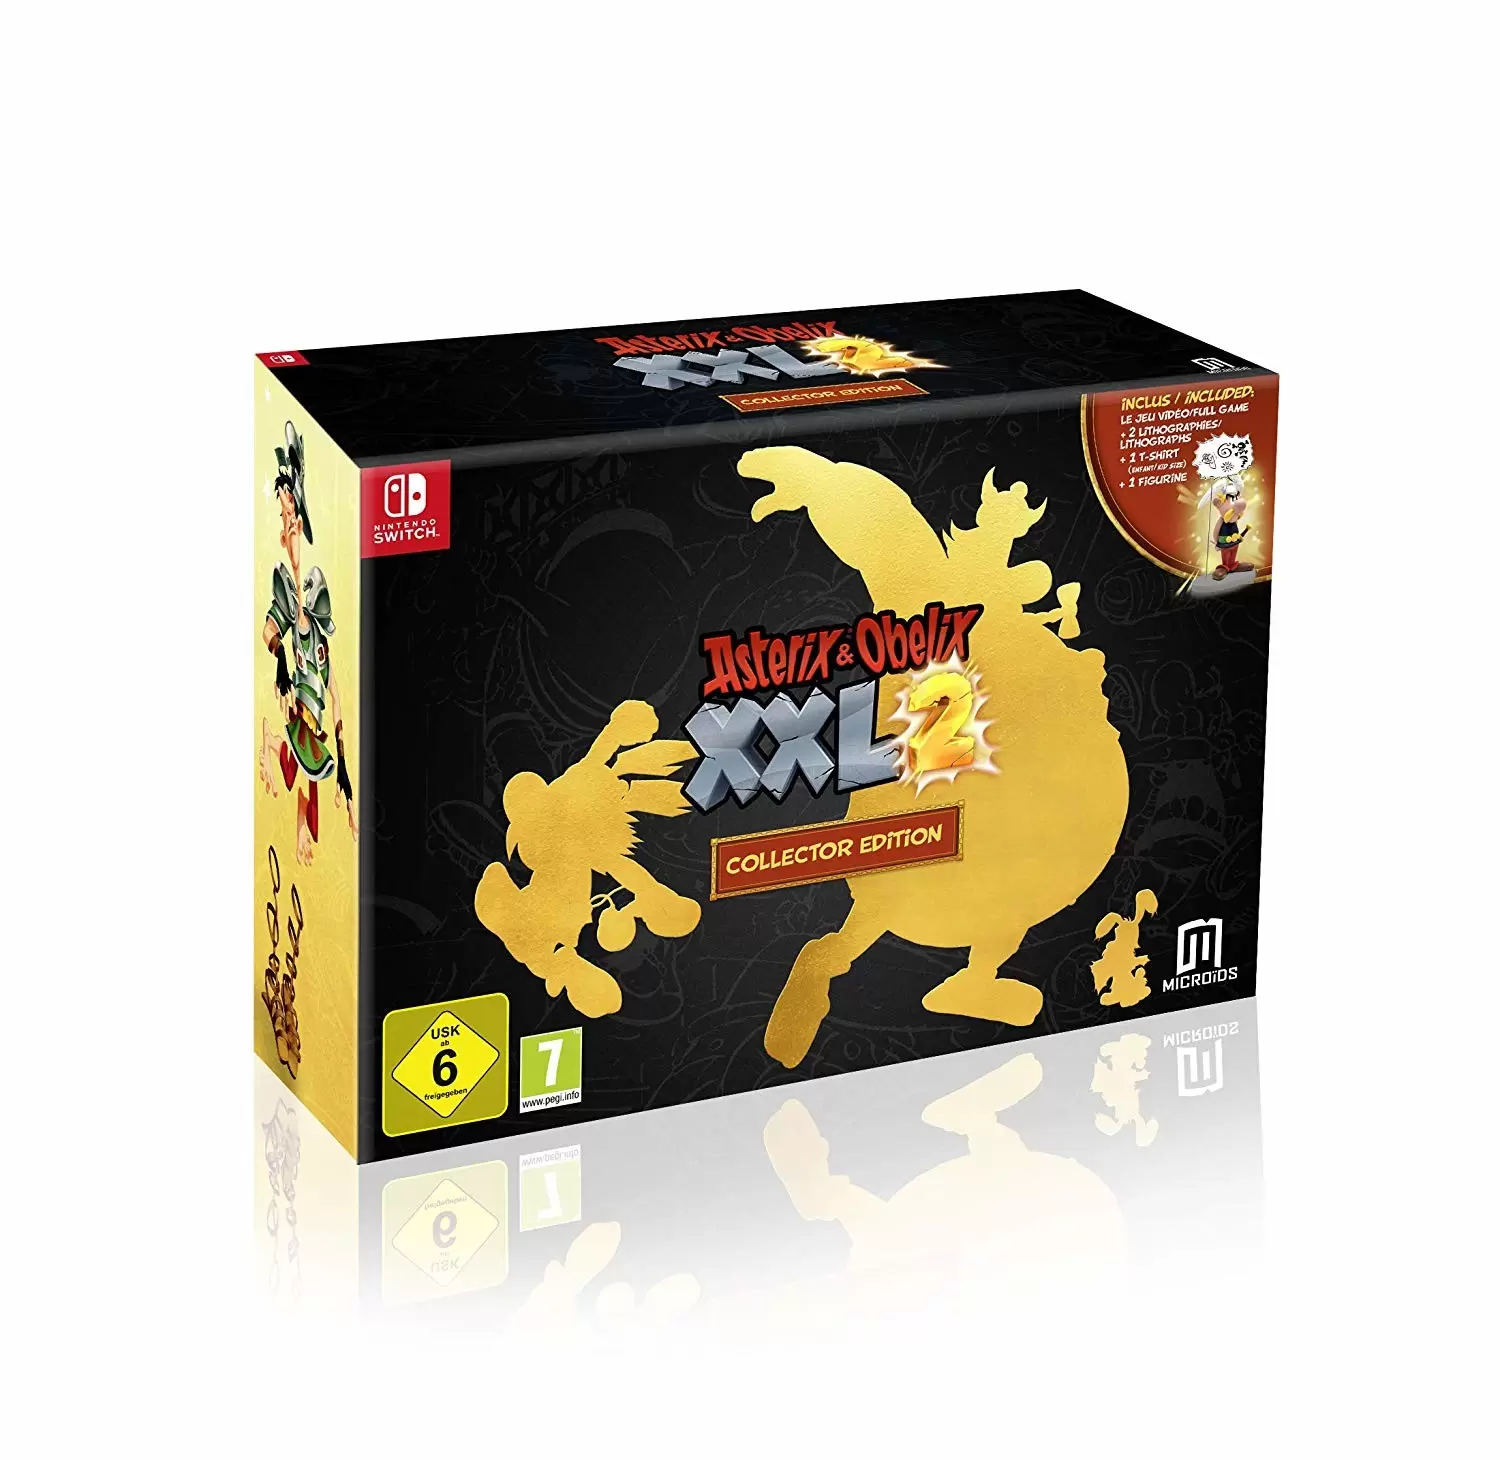 Nintendo Switch Games - Asterix Xxl 2 Mission Las Vegum Edition Collector